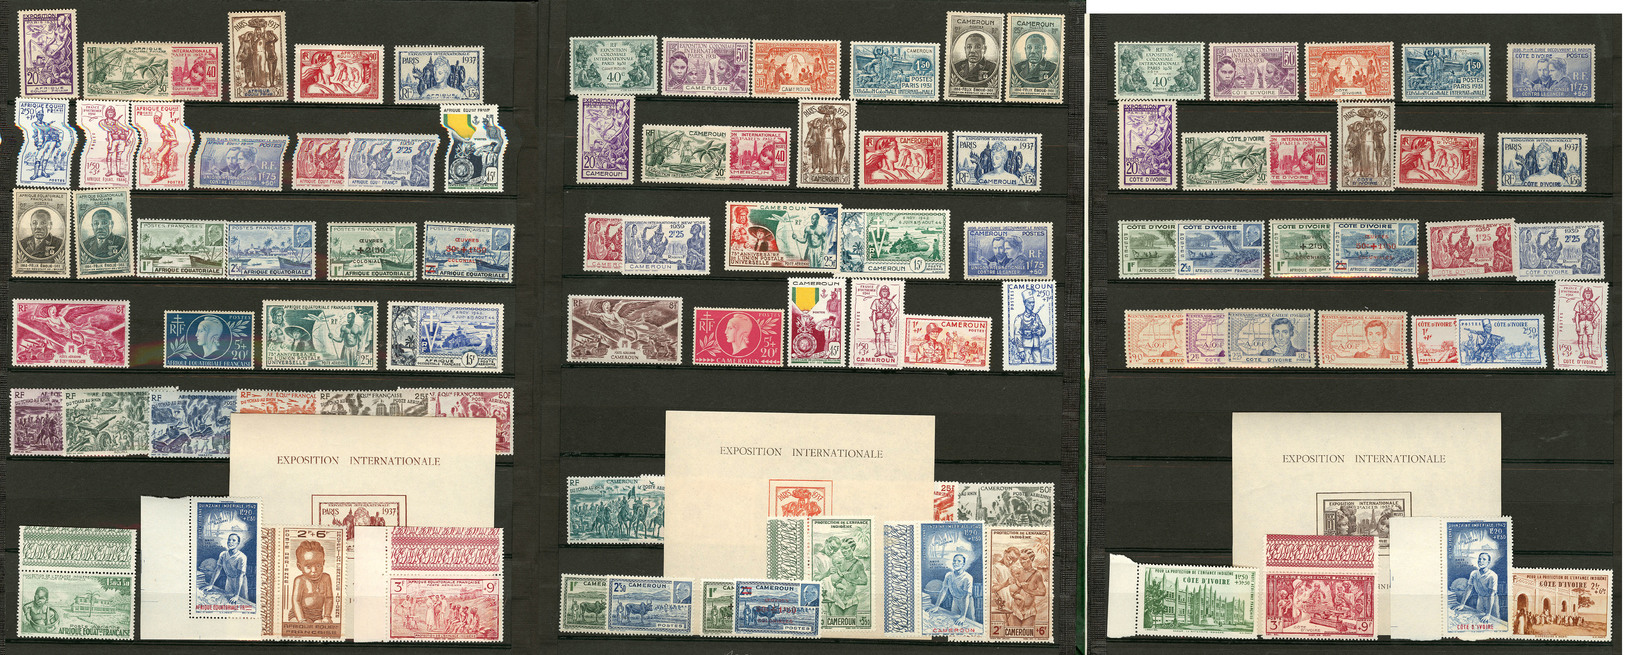 ** Collection. 1931-1965 (Poste, PA, BF), Dont Expo 37, PEIQI, Etc., Qqs Ex *. - TB - Unclassified